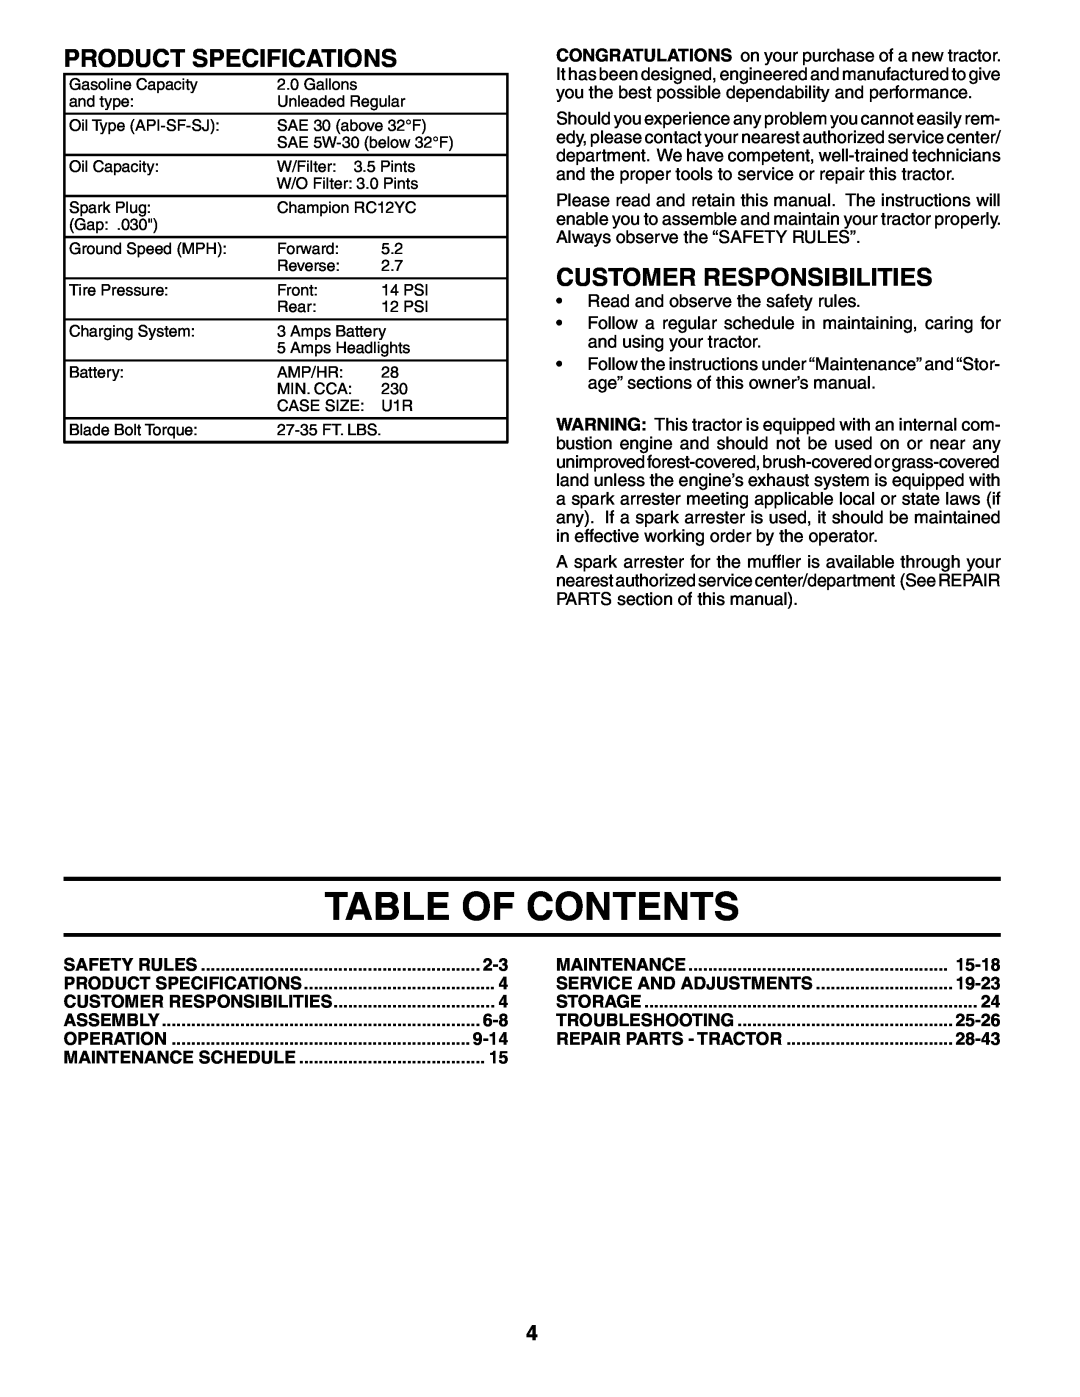 Husqvarna LTH18542 owner manual Table Of Contents, Product Specifications, Customer Responsibilities 